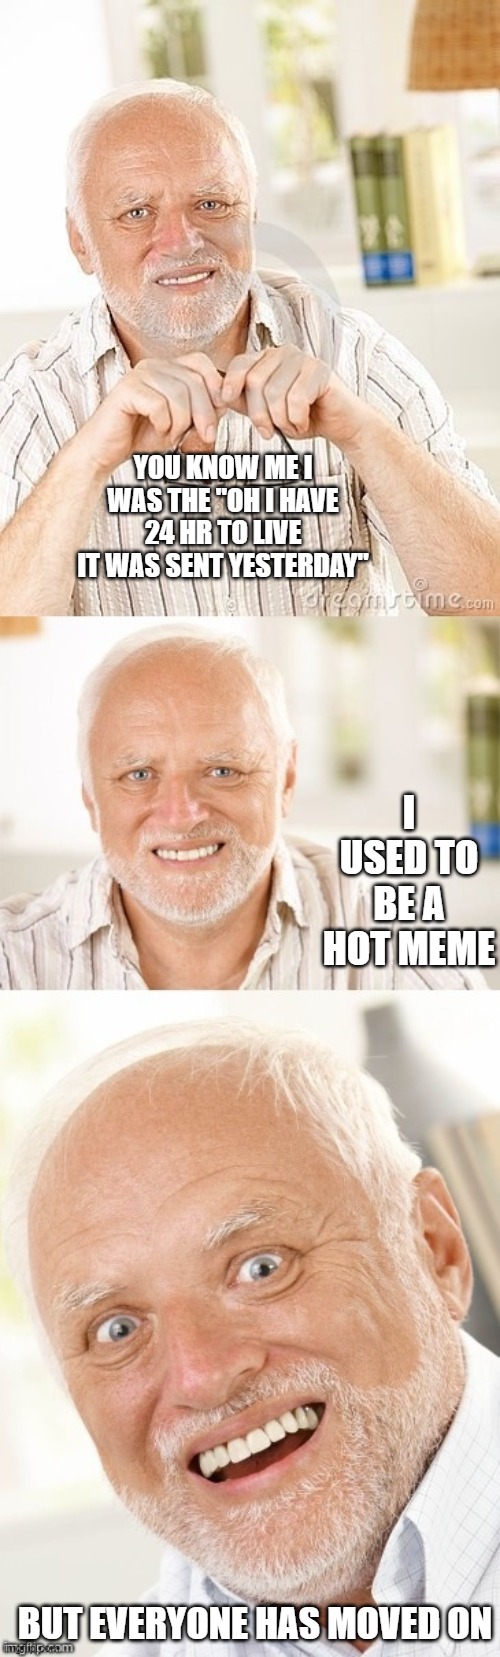 Hide the pun Harold | YOU KNOW ME I WAS THE "OH I HAVE 24 HR TO LIVE IT WAS SENT YESTERDAY"; I USED TO BE A HOT MEME; BUT EVERYONE HAS MOVED ON | image tagged in hide the pun harold | made w/ Imgflip meme maker